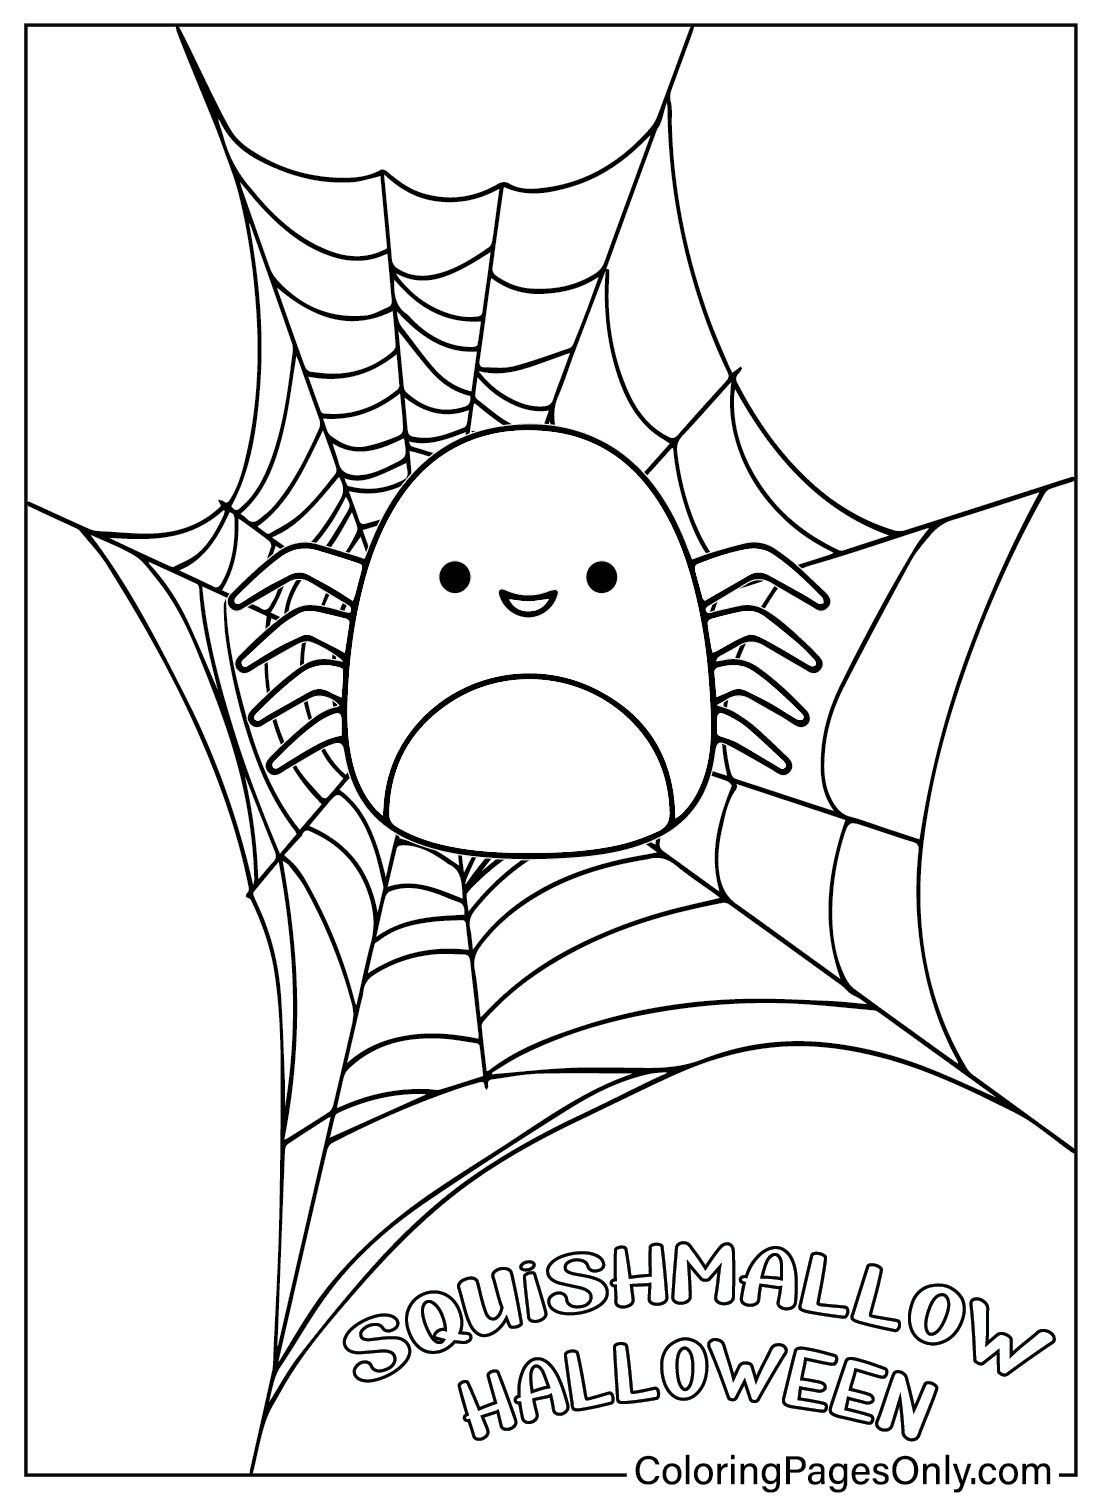 Bella Squishmallow Halloween Coloring Page from Squishmallow Halloween